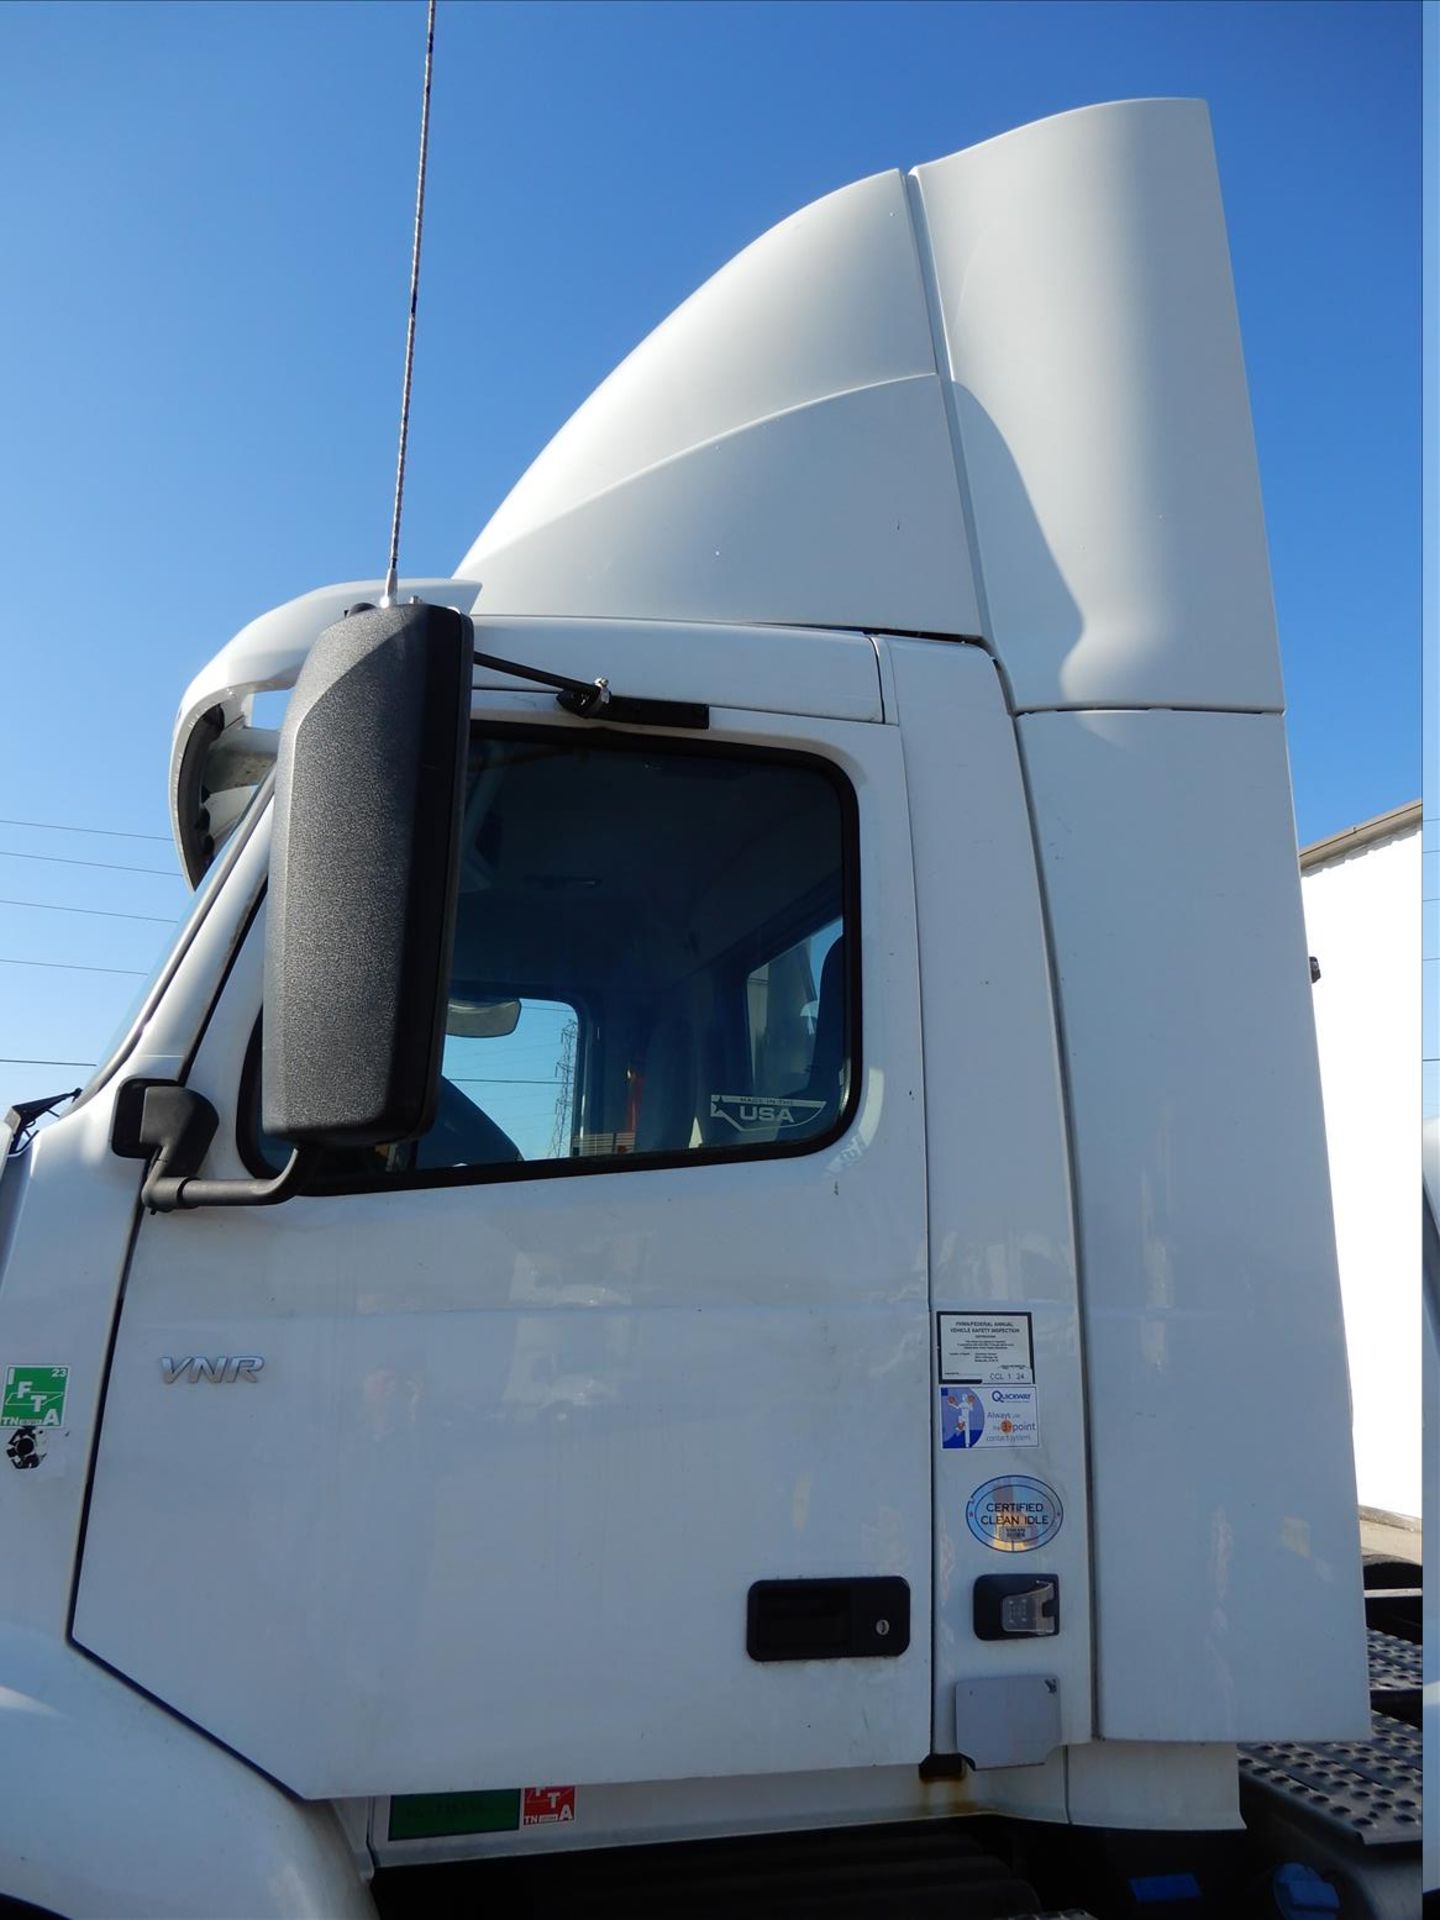 2019 Volvo VNR 300 Daycab Truck Tractor - Located in Indianapolis, IN - Bild 10 aus 61